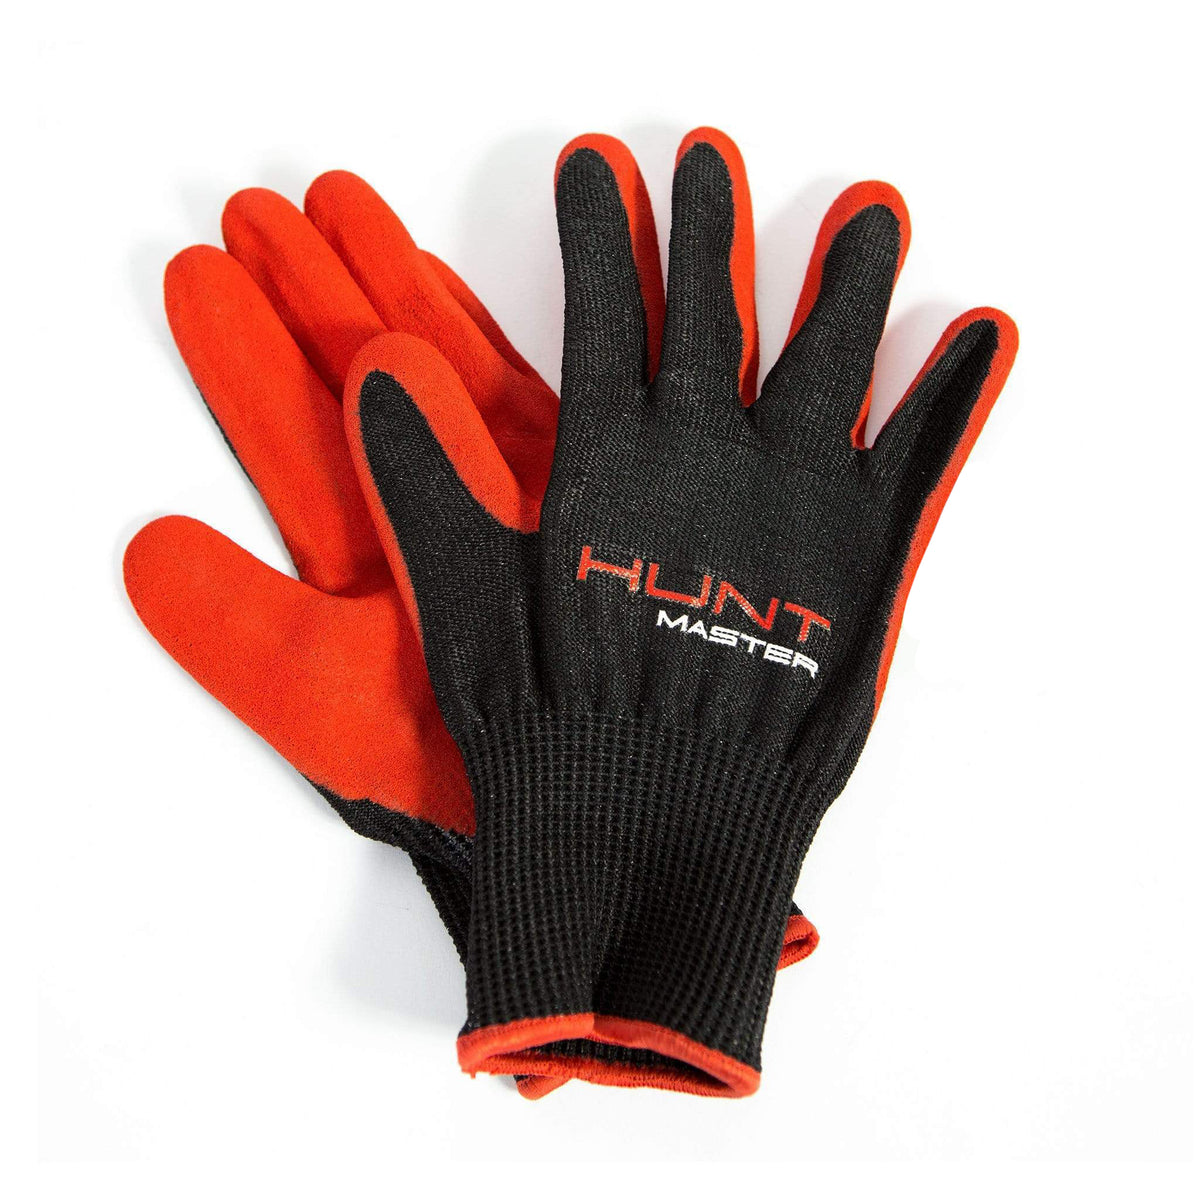 Tuff Diving Gloves - Anti-Cut  HuntMaster Spearfishing & Diving